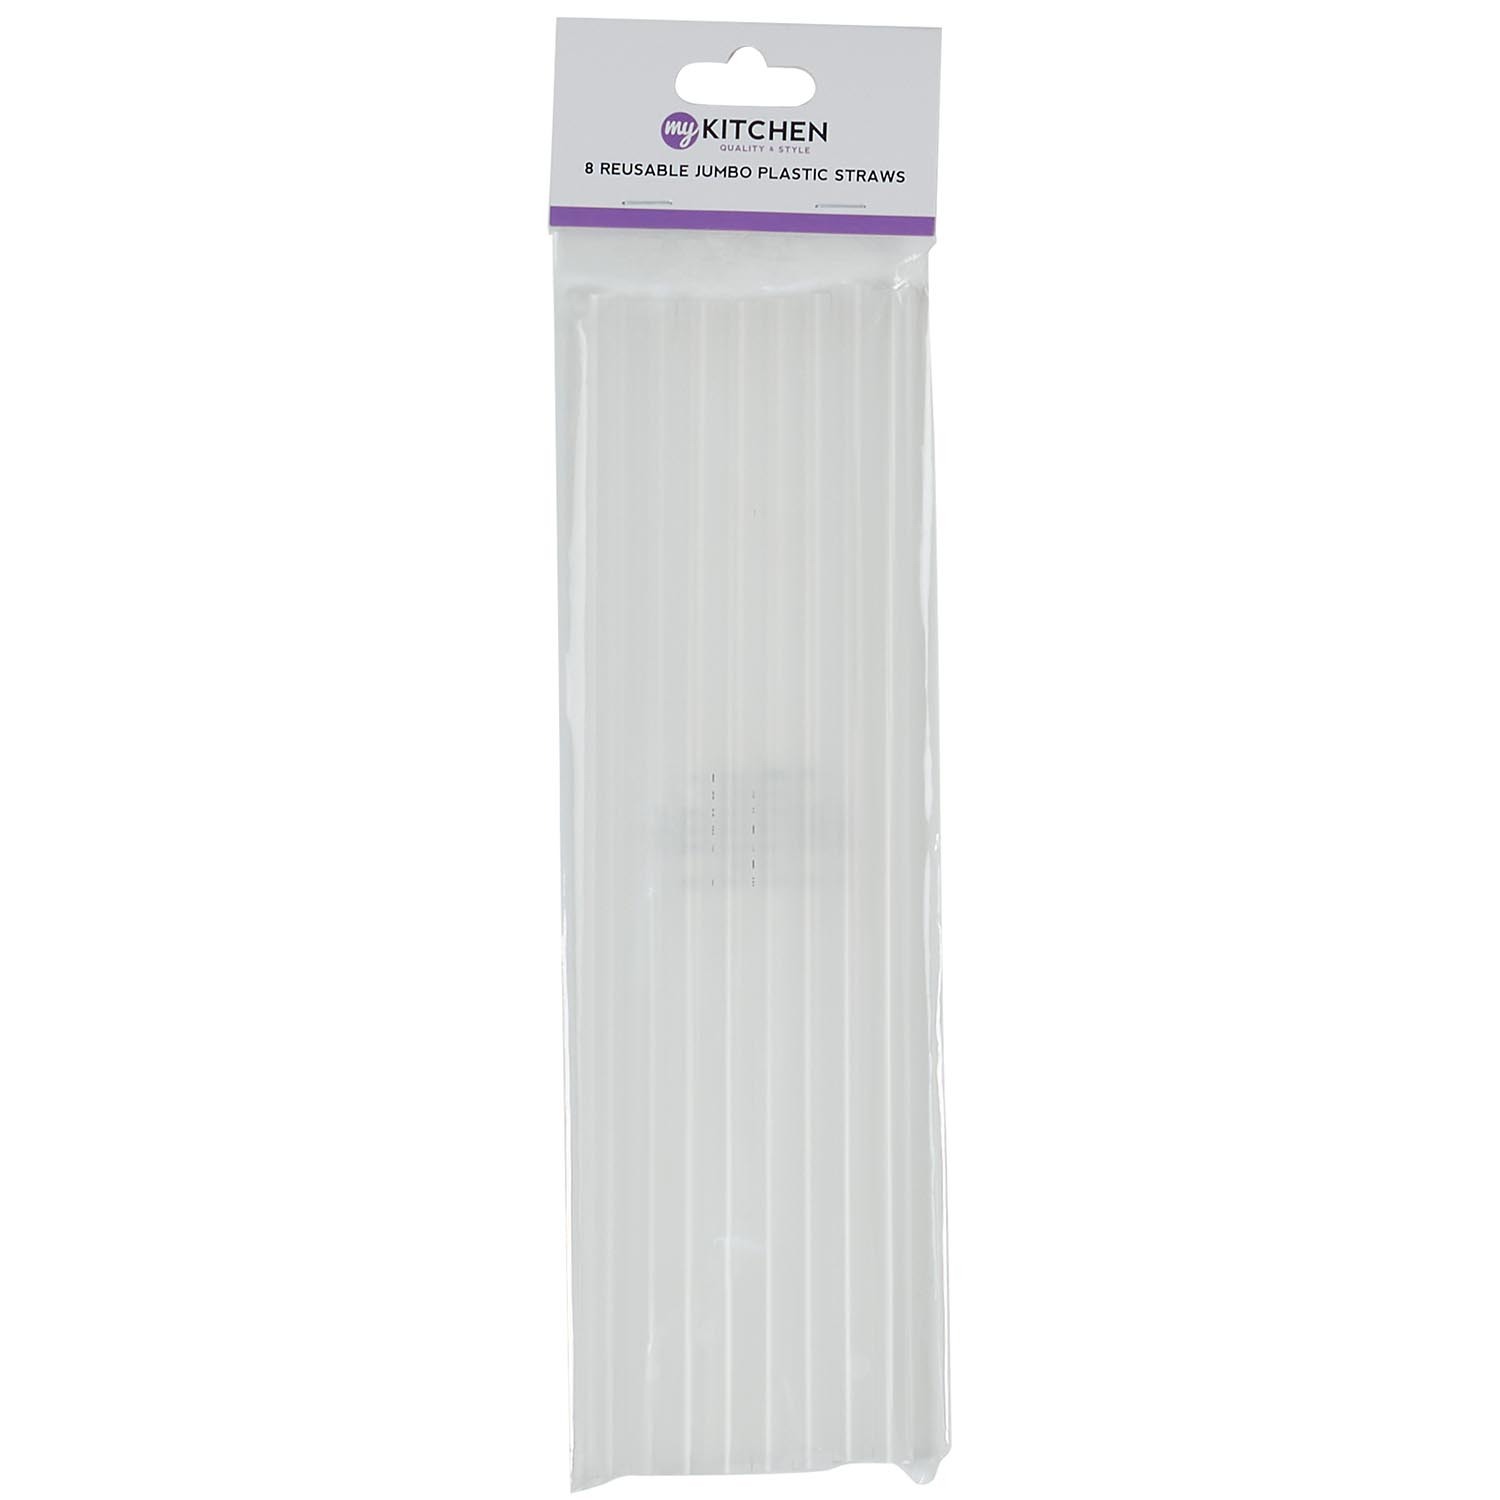 Pack of 8 Reusable Jumbo Plastic Straws - Clear Image 1